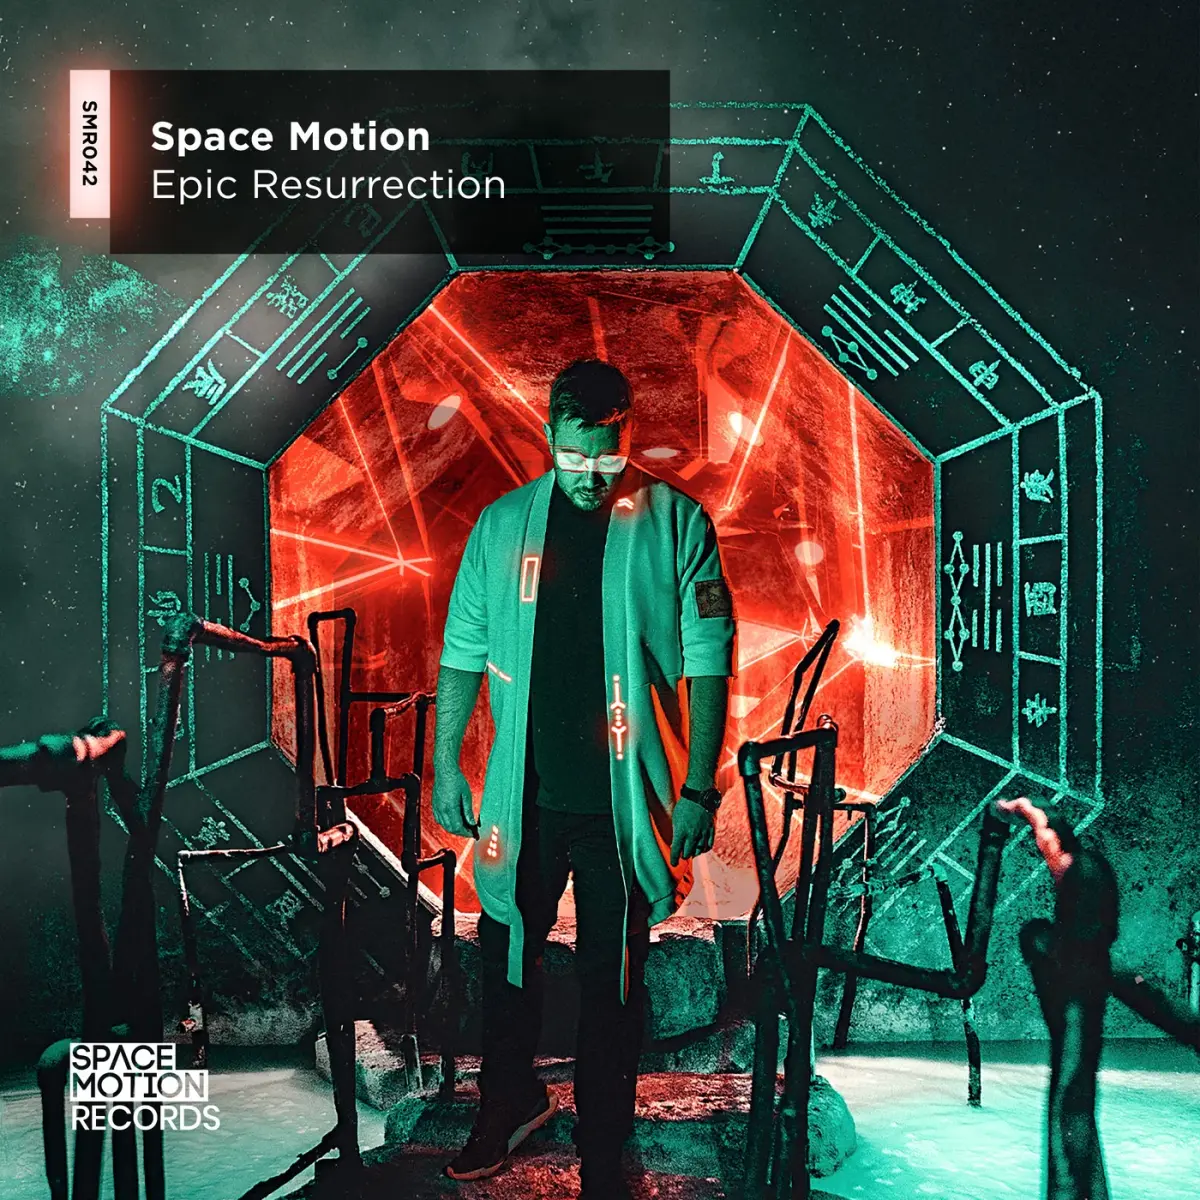 "EPIC RESURRECTION" - SPACE MOTION [SPACE MOTION RECORDS]